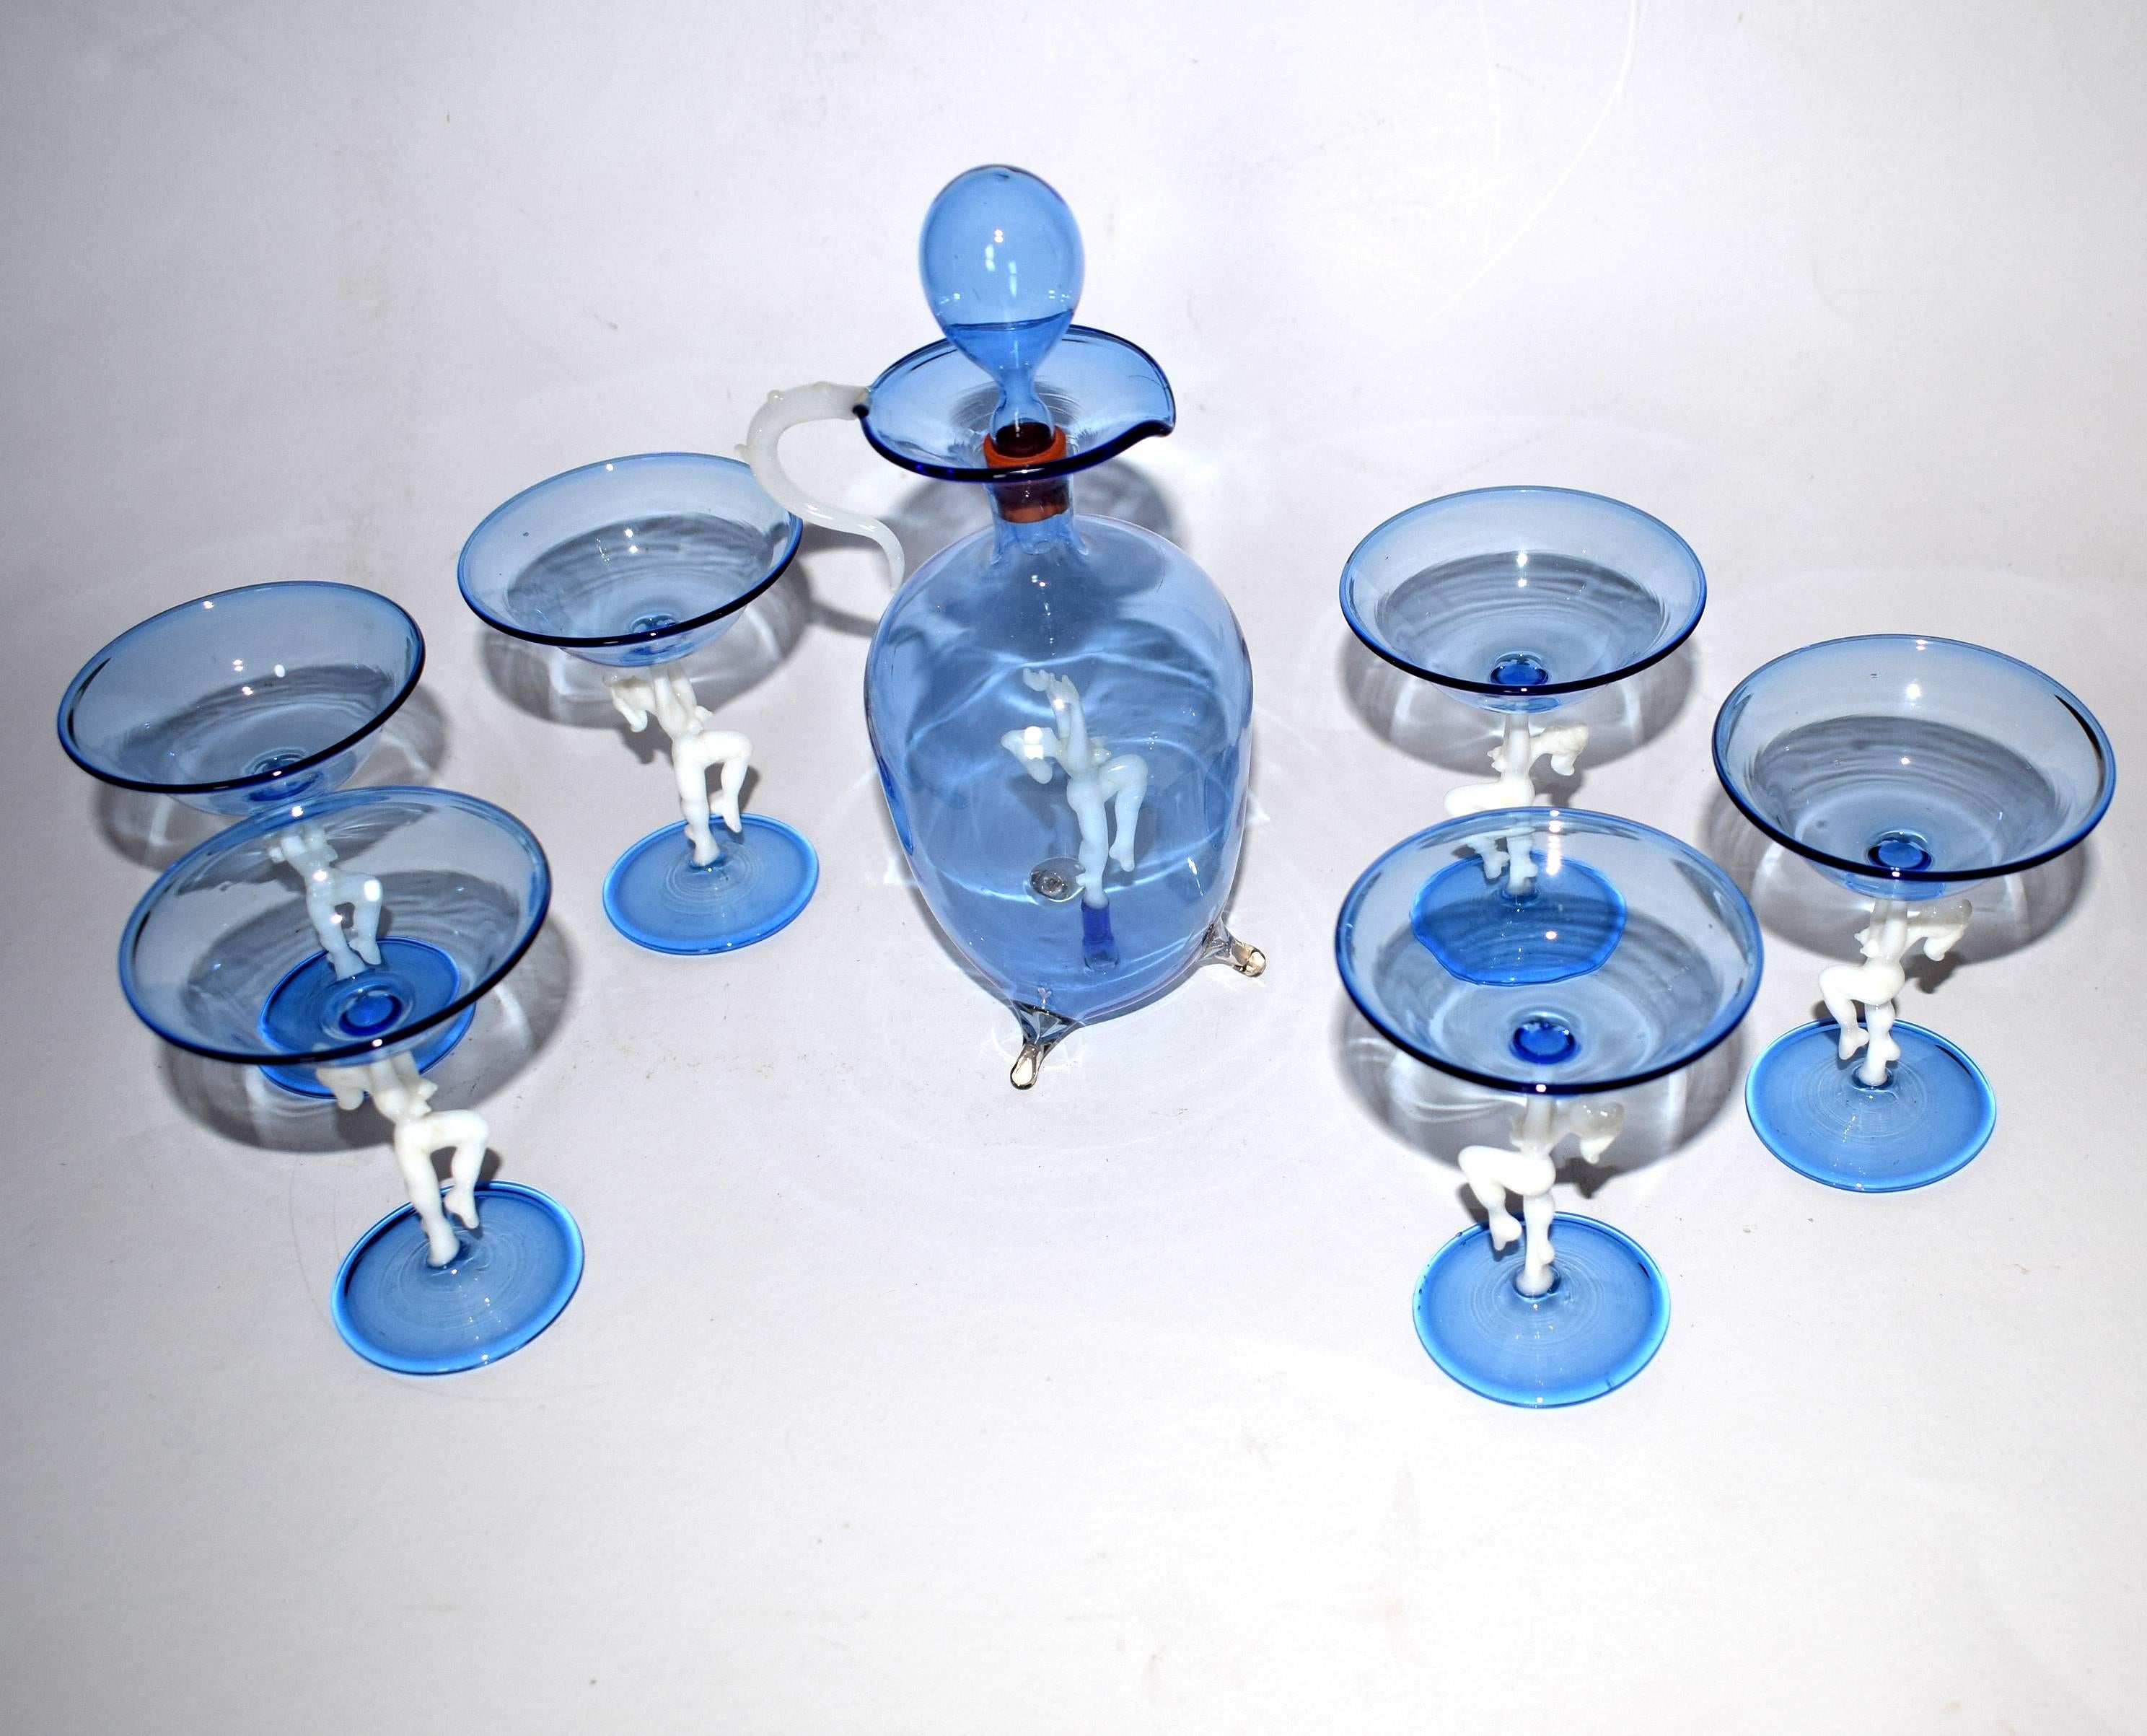 A slightly cheeky Art Deco decanter set with matching set of six glasses in handblown blue glass, in the style of Bimini. The stems designed as nude ladies. Very delicate to touch and amazing that something like this last all these years. This